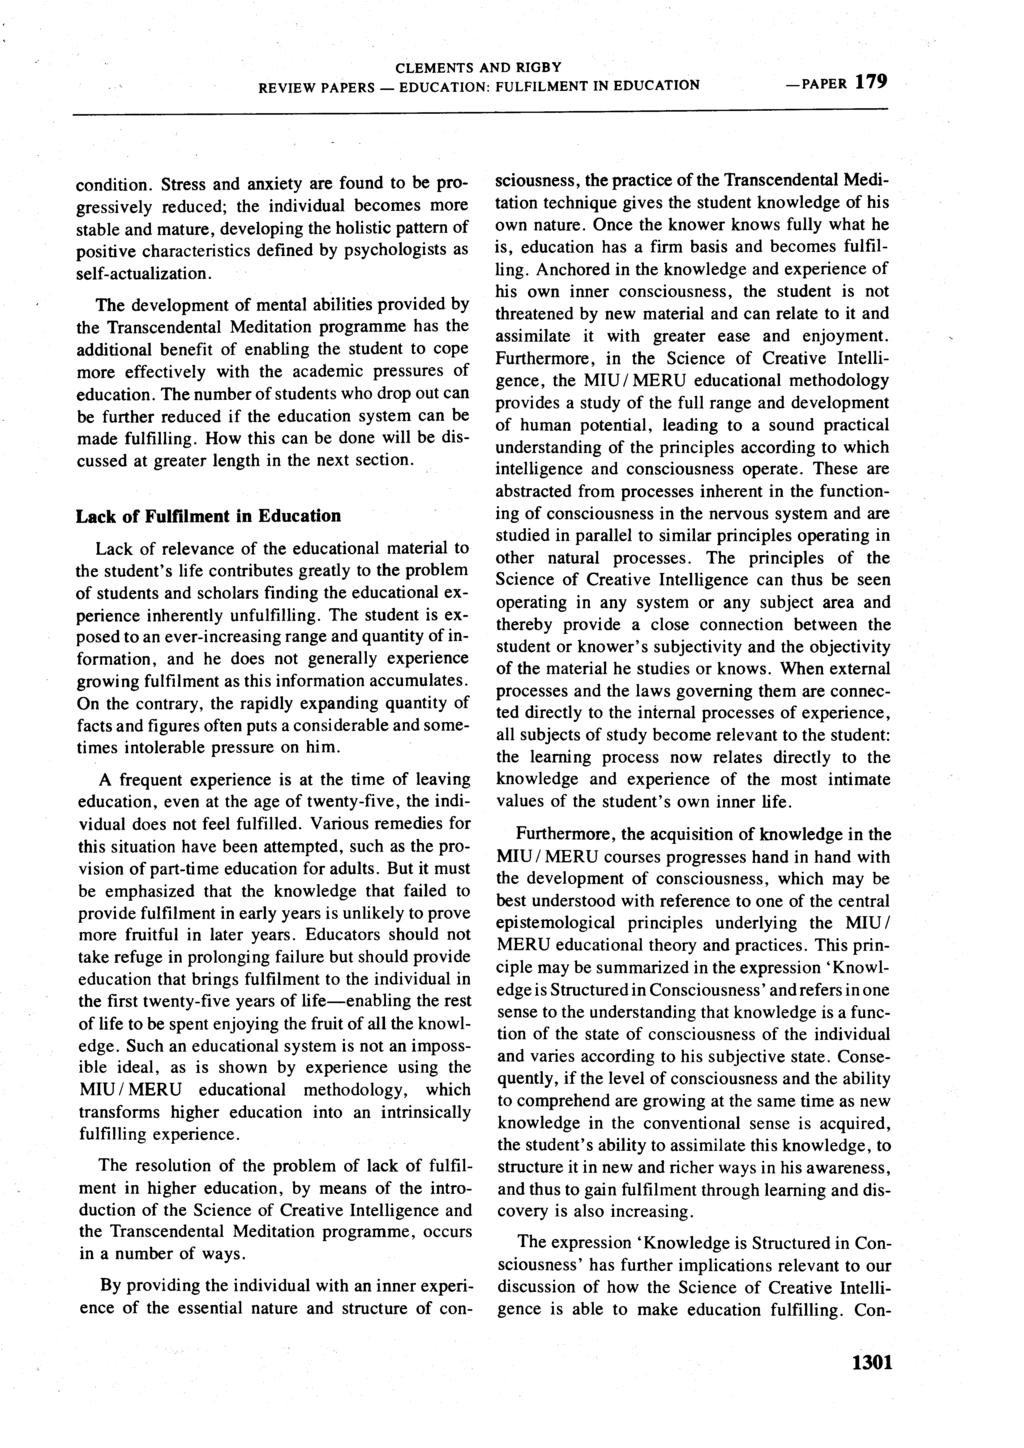 CLEMENTS AND RIGBY REVIEW PAPERS- EDUCATION: FULFILMENT IN EDUCATION -PAPER 179 condition.